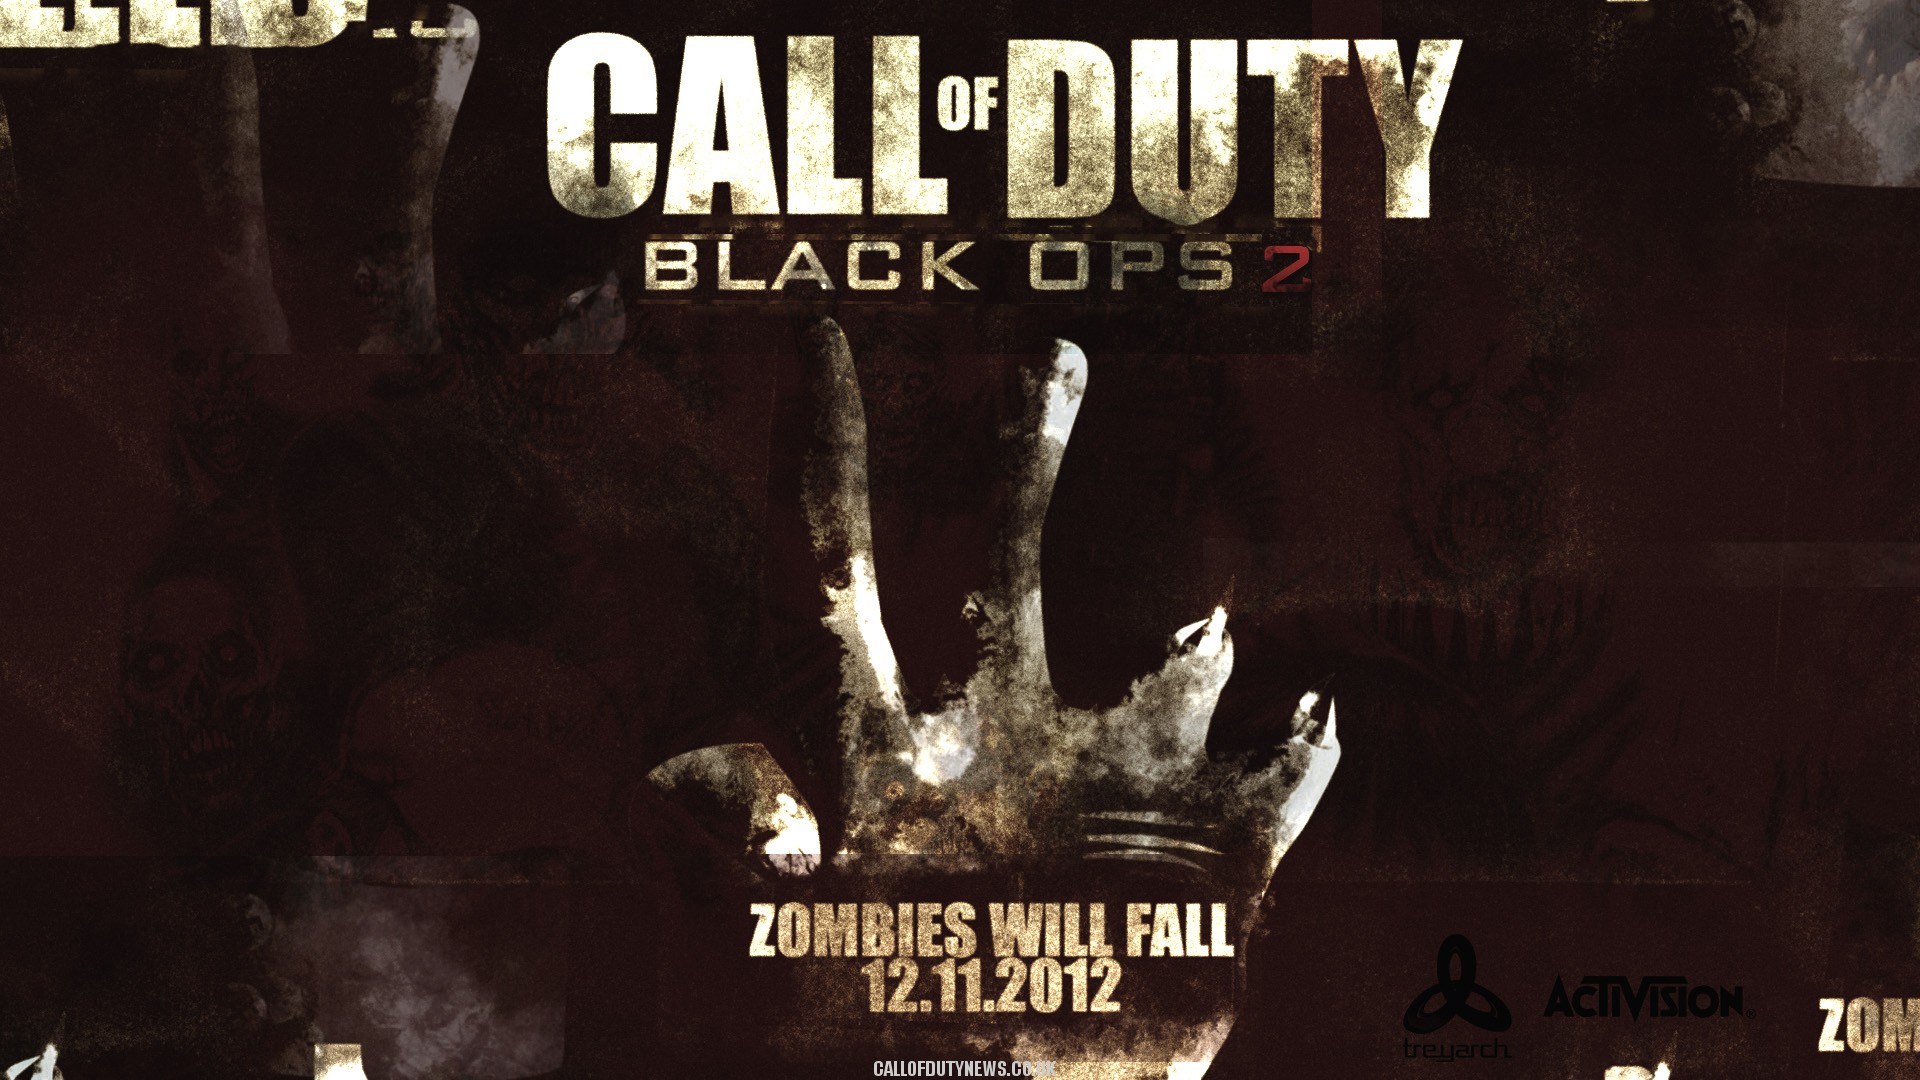 Check out the new Wallpaper section | Call of Duty Blog